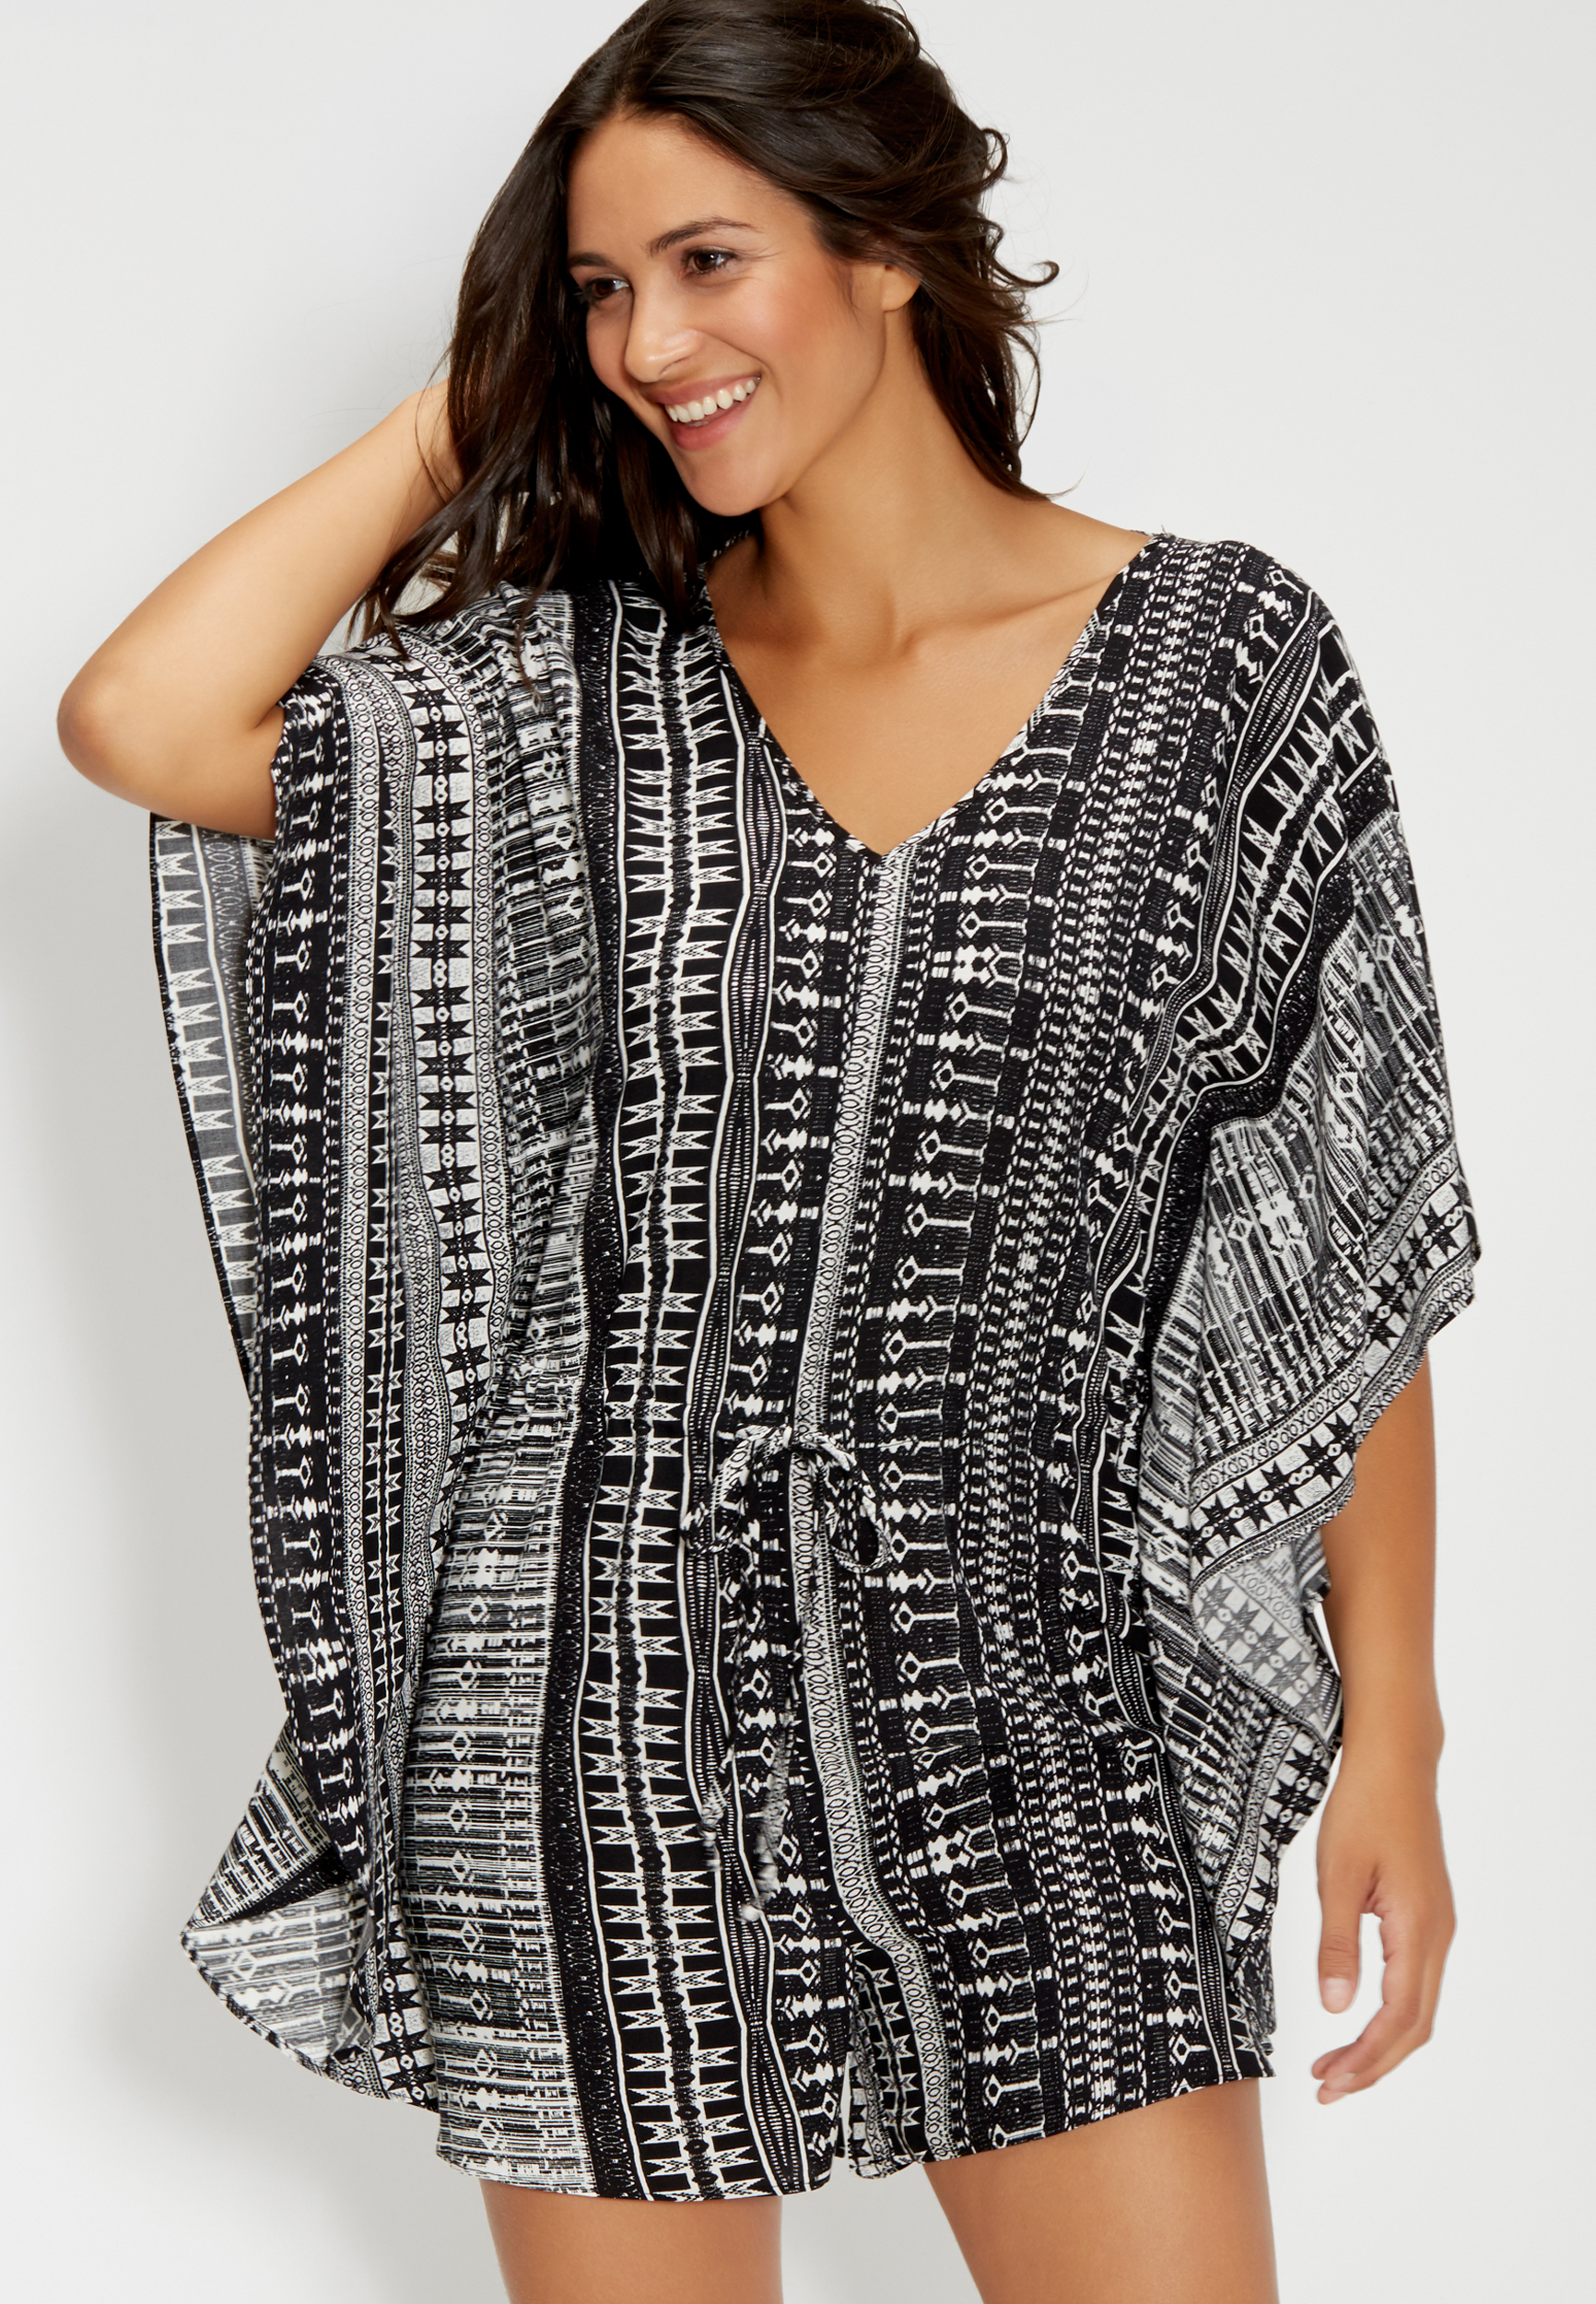 dolman romper in ethnic print | maurices